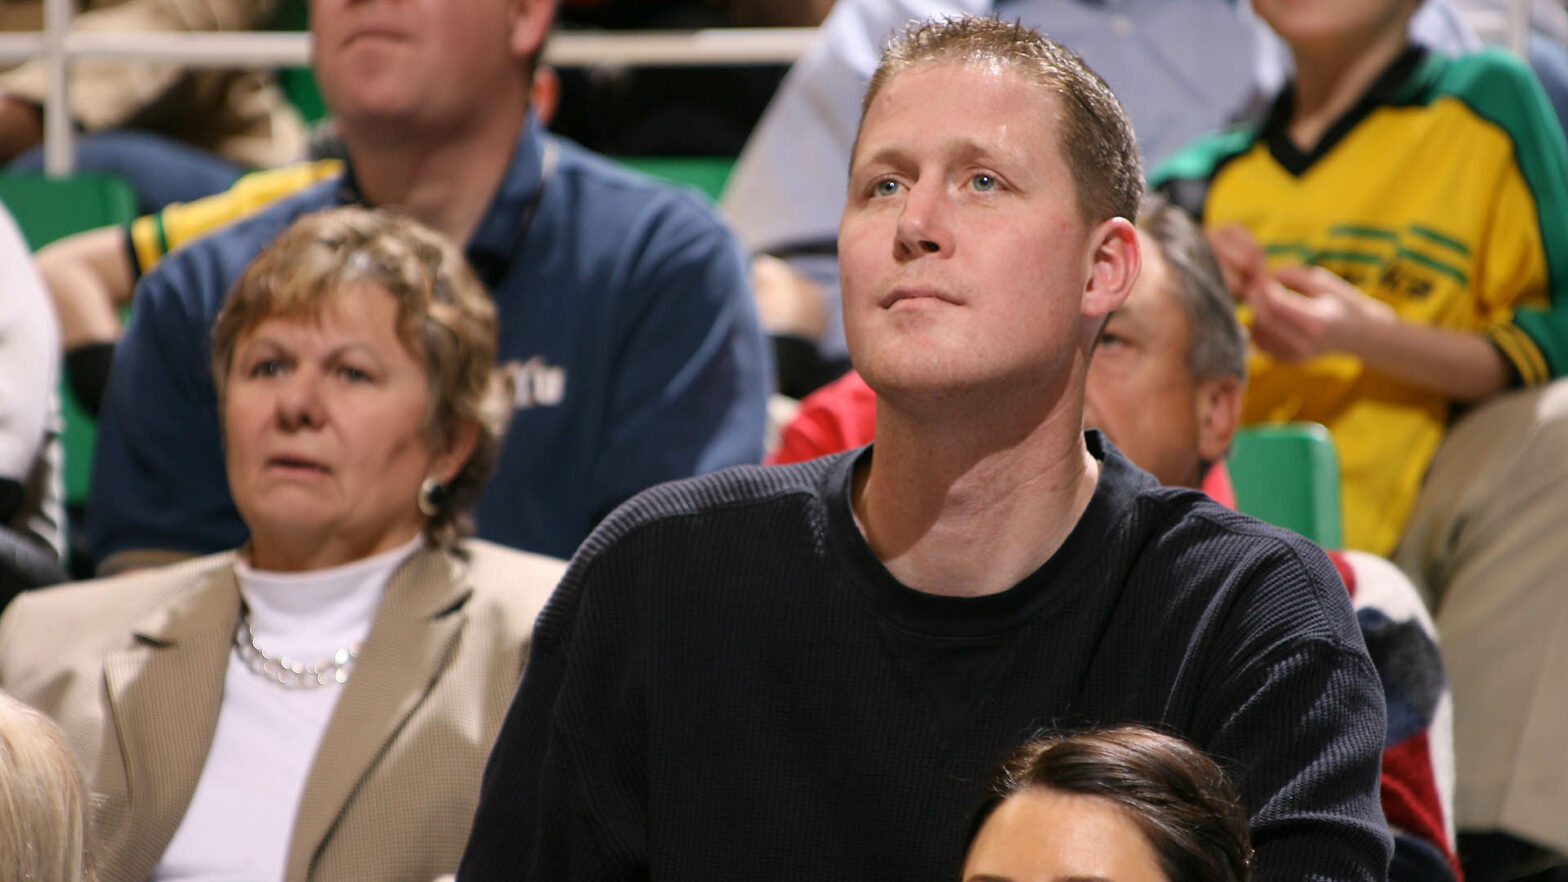 former-nba-center-shawn-bradley-paralyzed-as-result-of-bike-accident